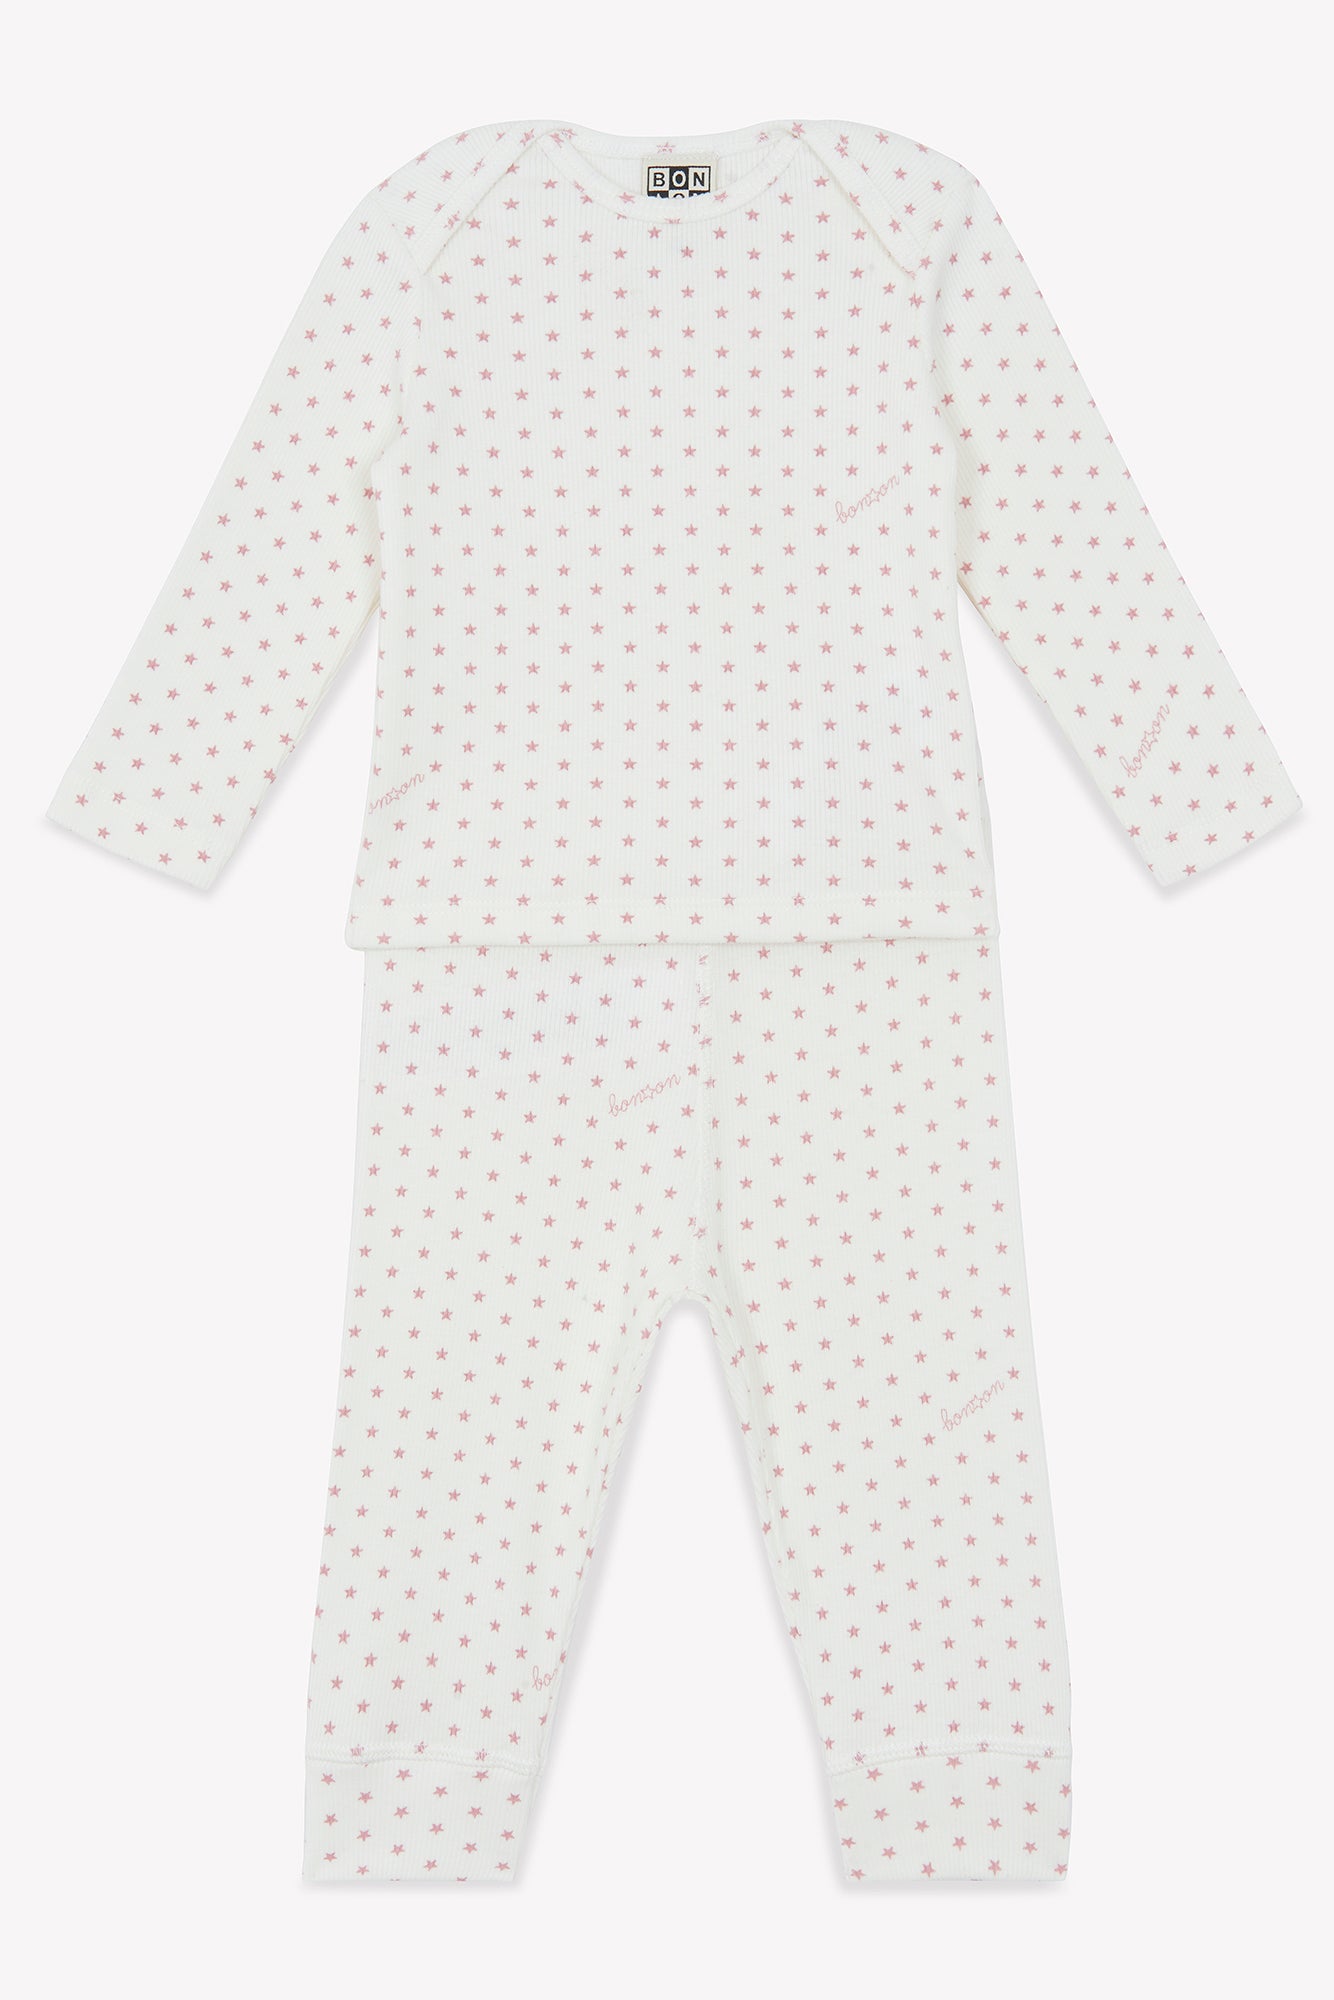 Outfit - Pajamas 2 rooms Pink Baby in cotton Print stars